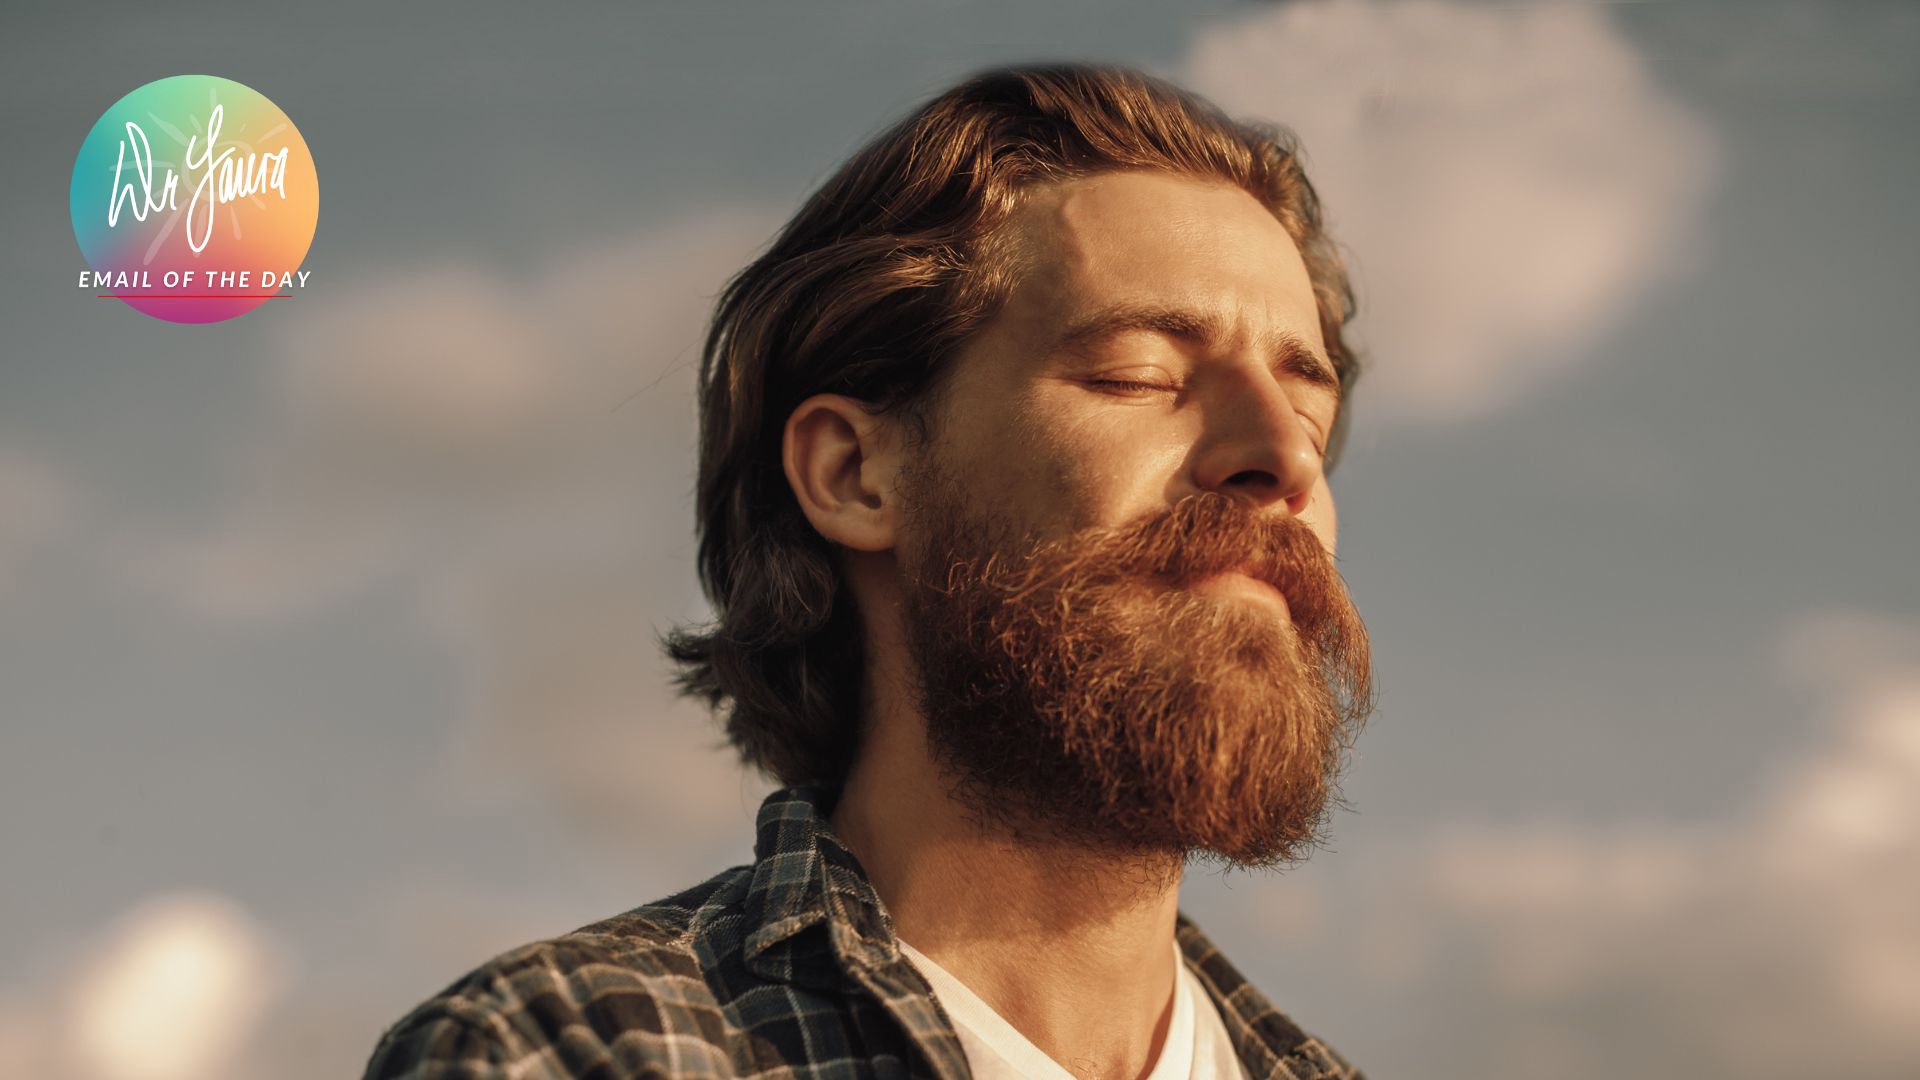 Man with ginger hair and beard wearing plaid shirt closes eyes and looks up